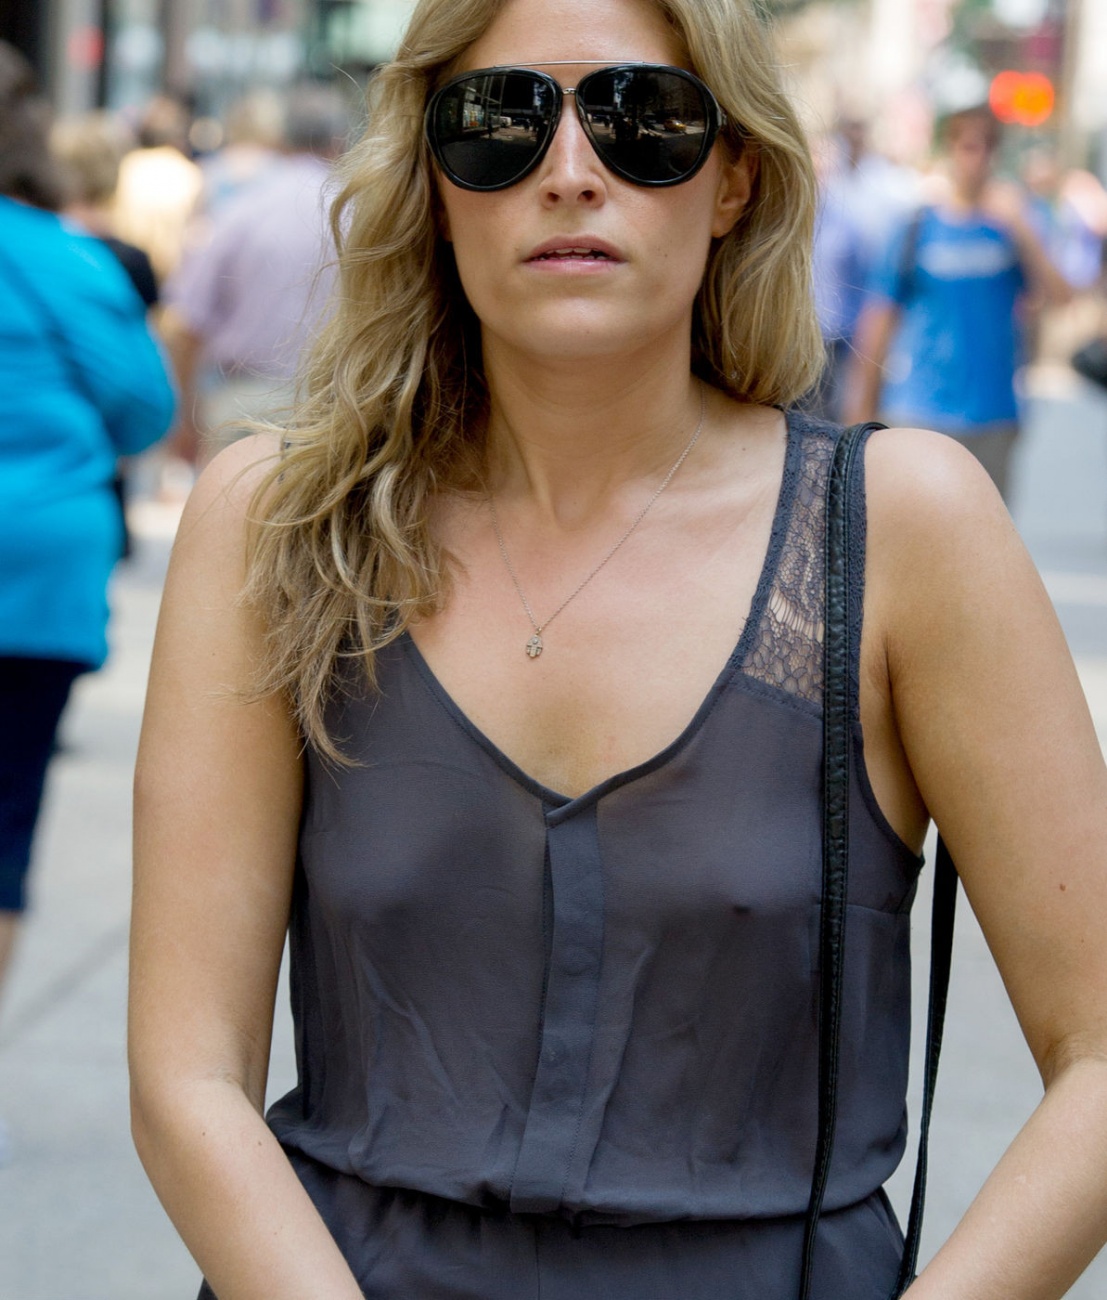 Does A Sheer Blouse Look Best Worn Without A Bra?